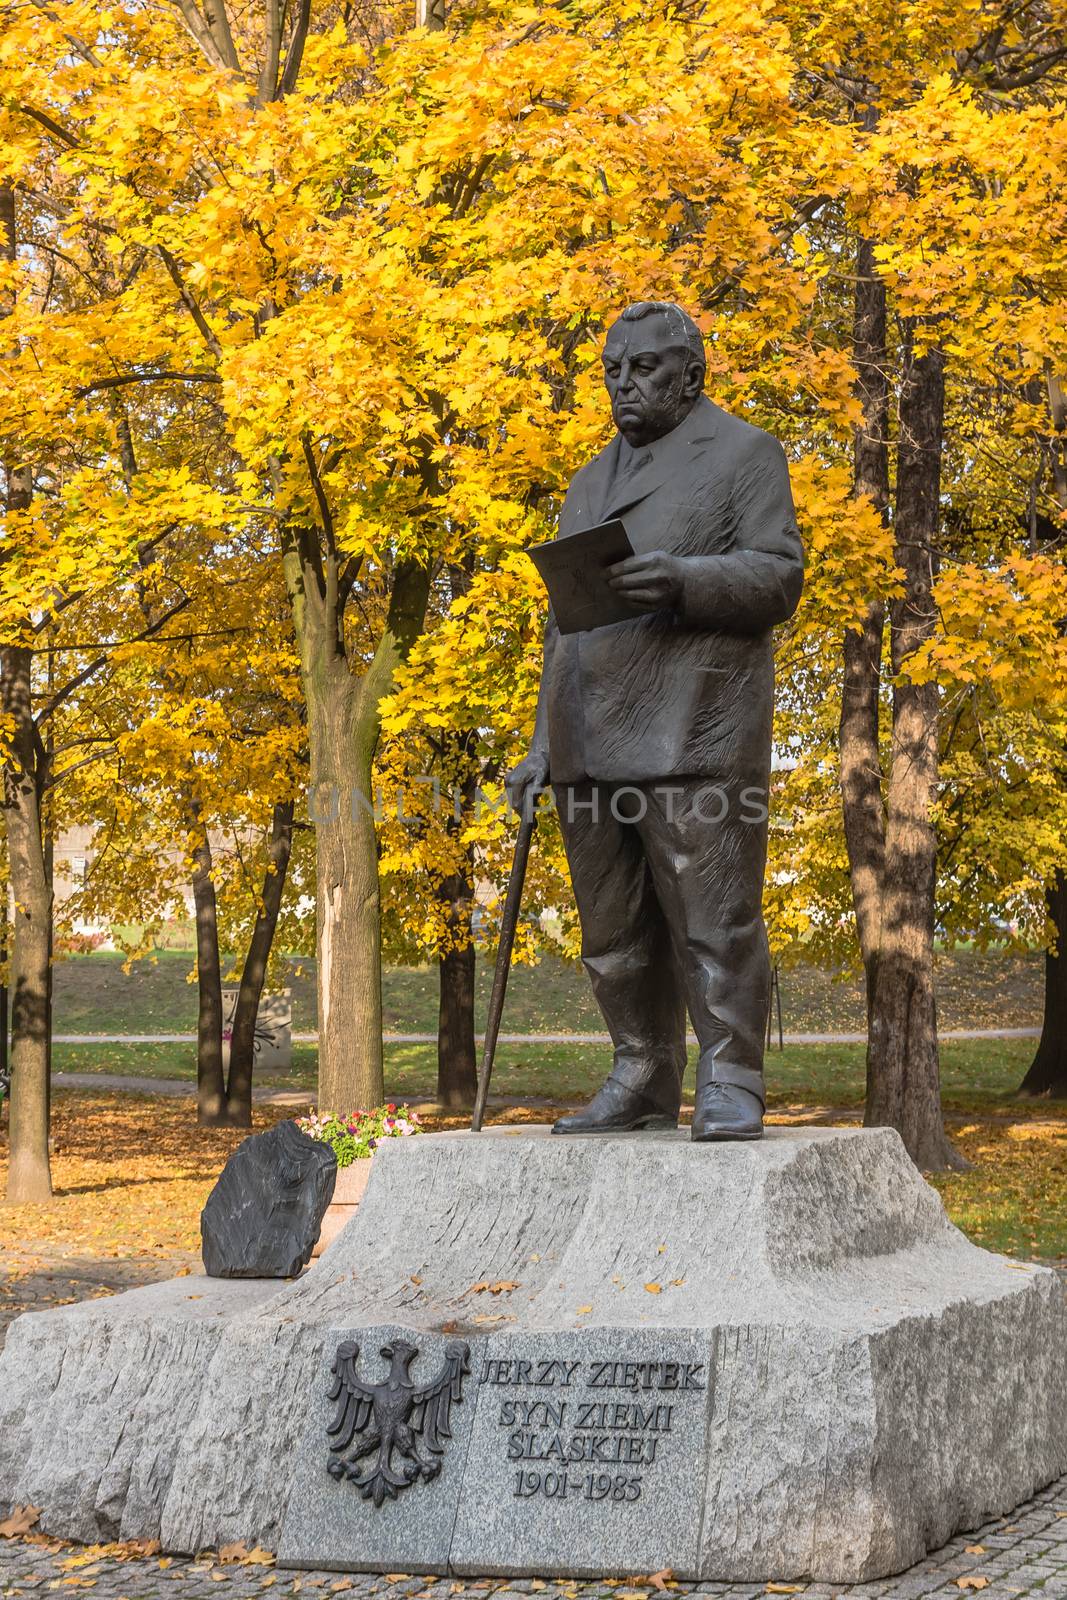 Monument to Jerzy Zietek (1901-1985) in Katowice. Jerzy Ziętek was a Polish politician,  local activist, representing Silesia in the People's Republic of Poland.